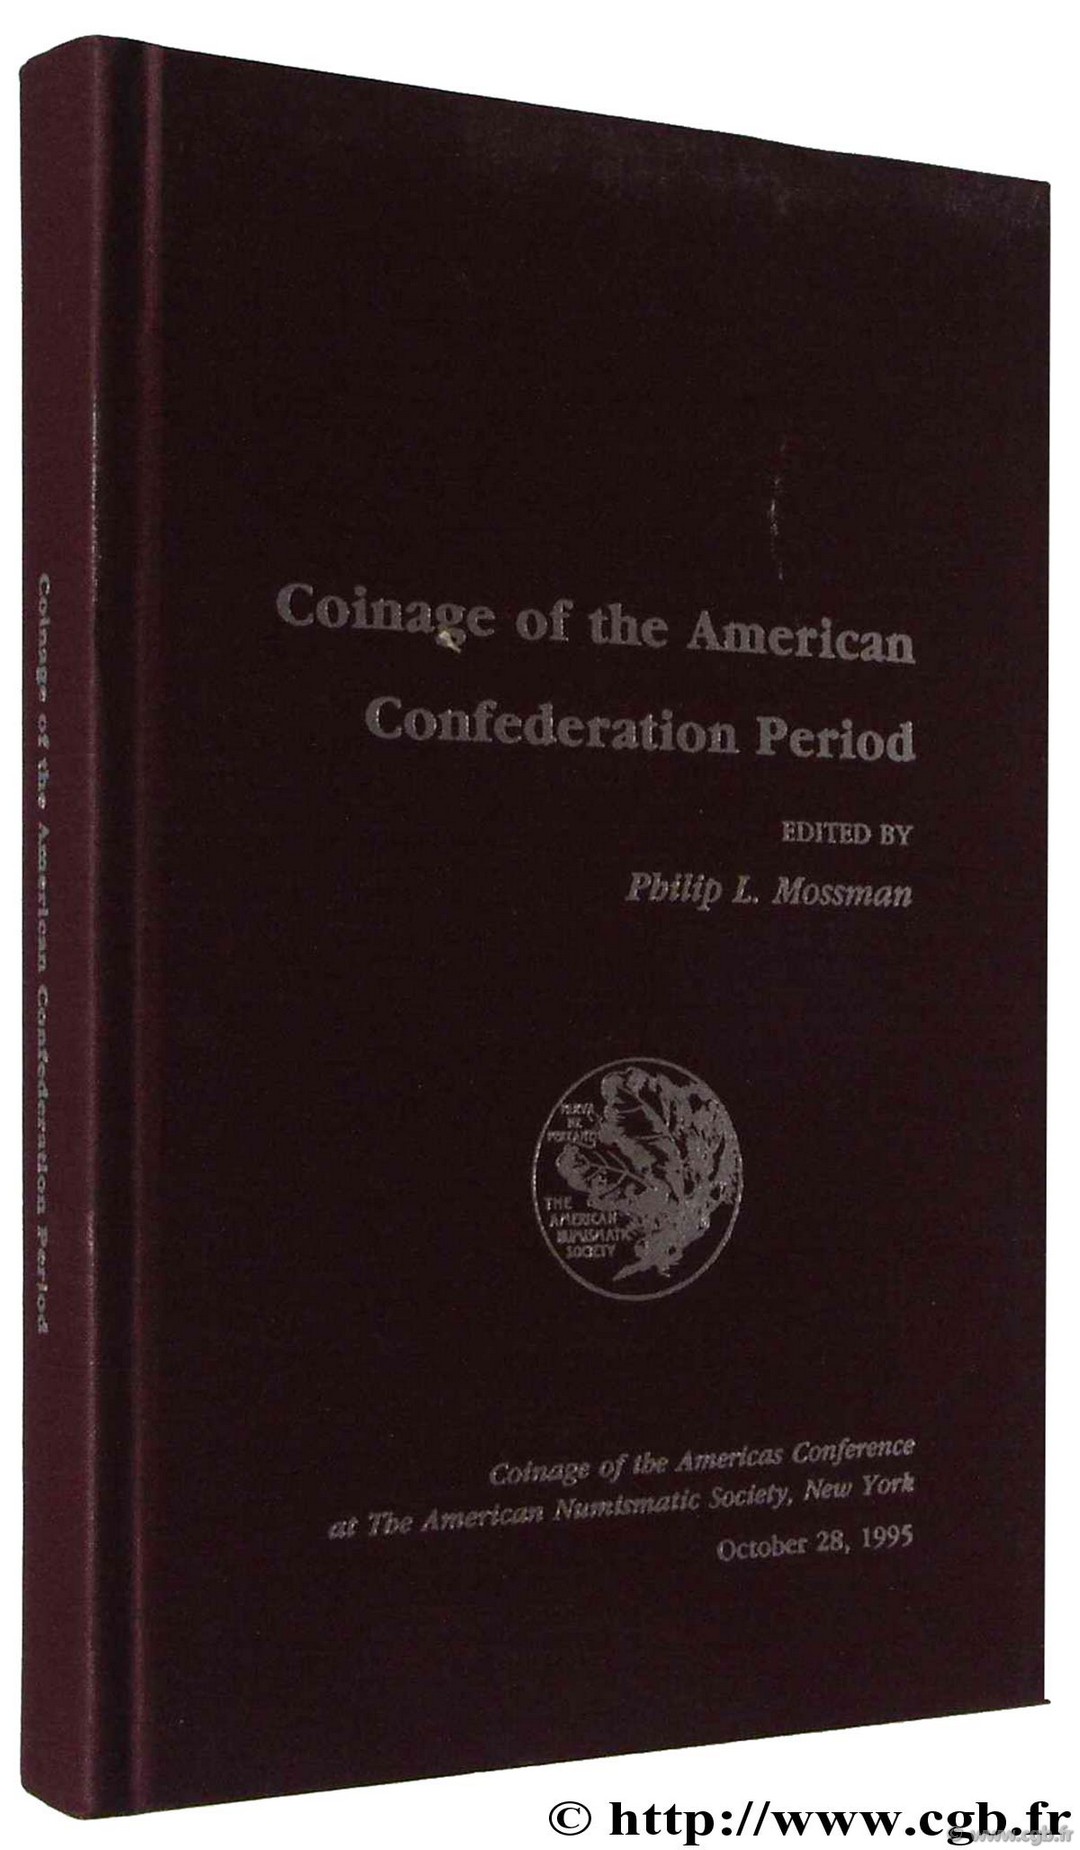 Coinage of the American Confederation Period, Coinage of the Americas Conférence at the American Numismatic Society, New York October 28, 1995 